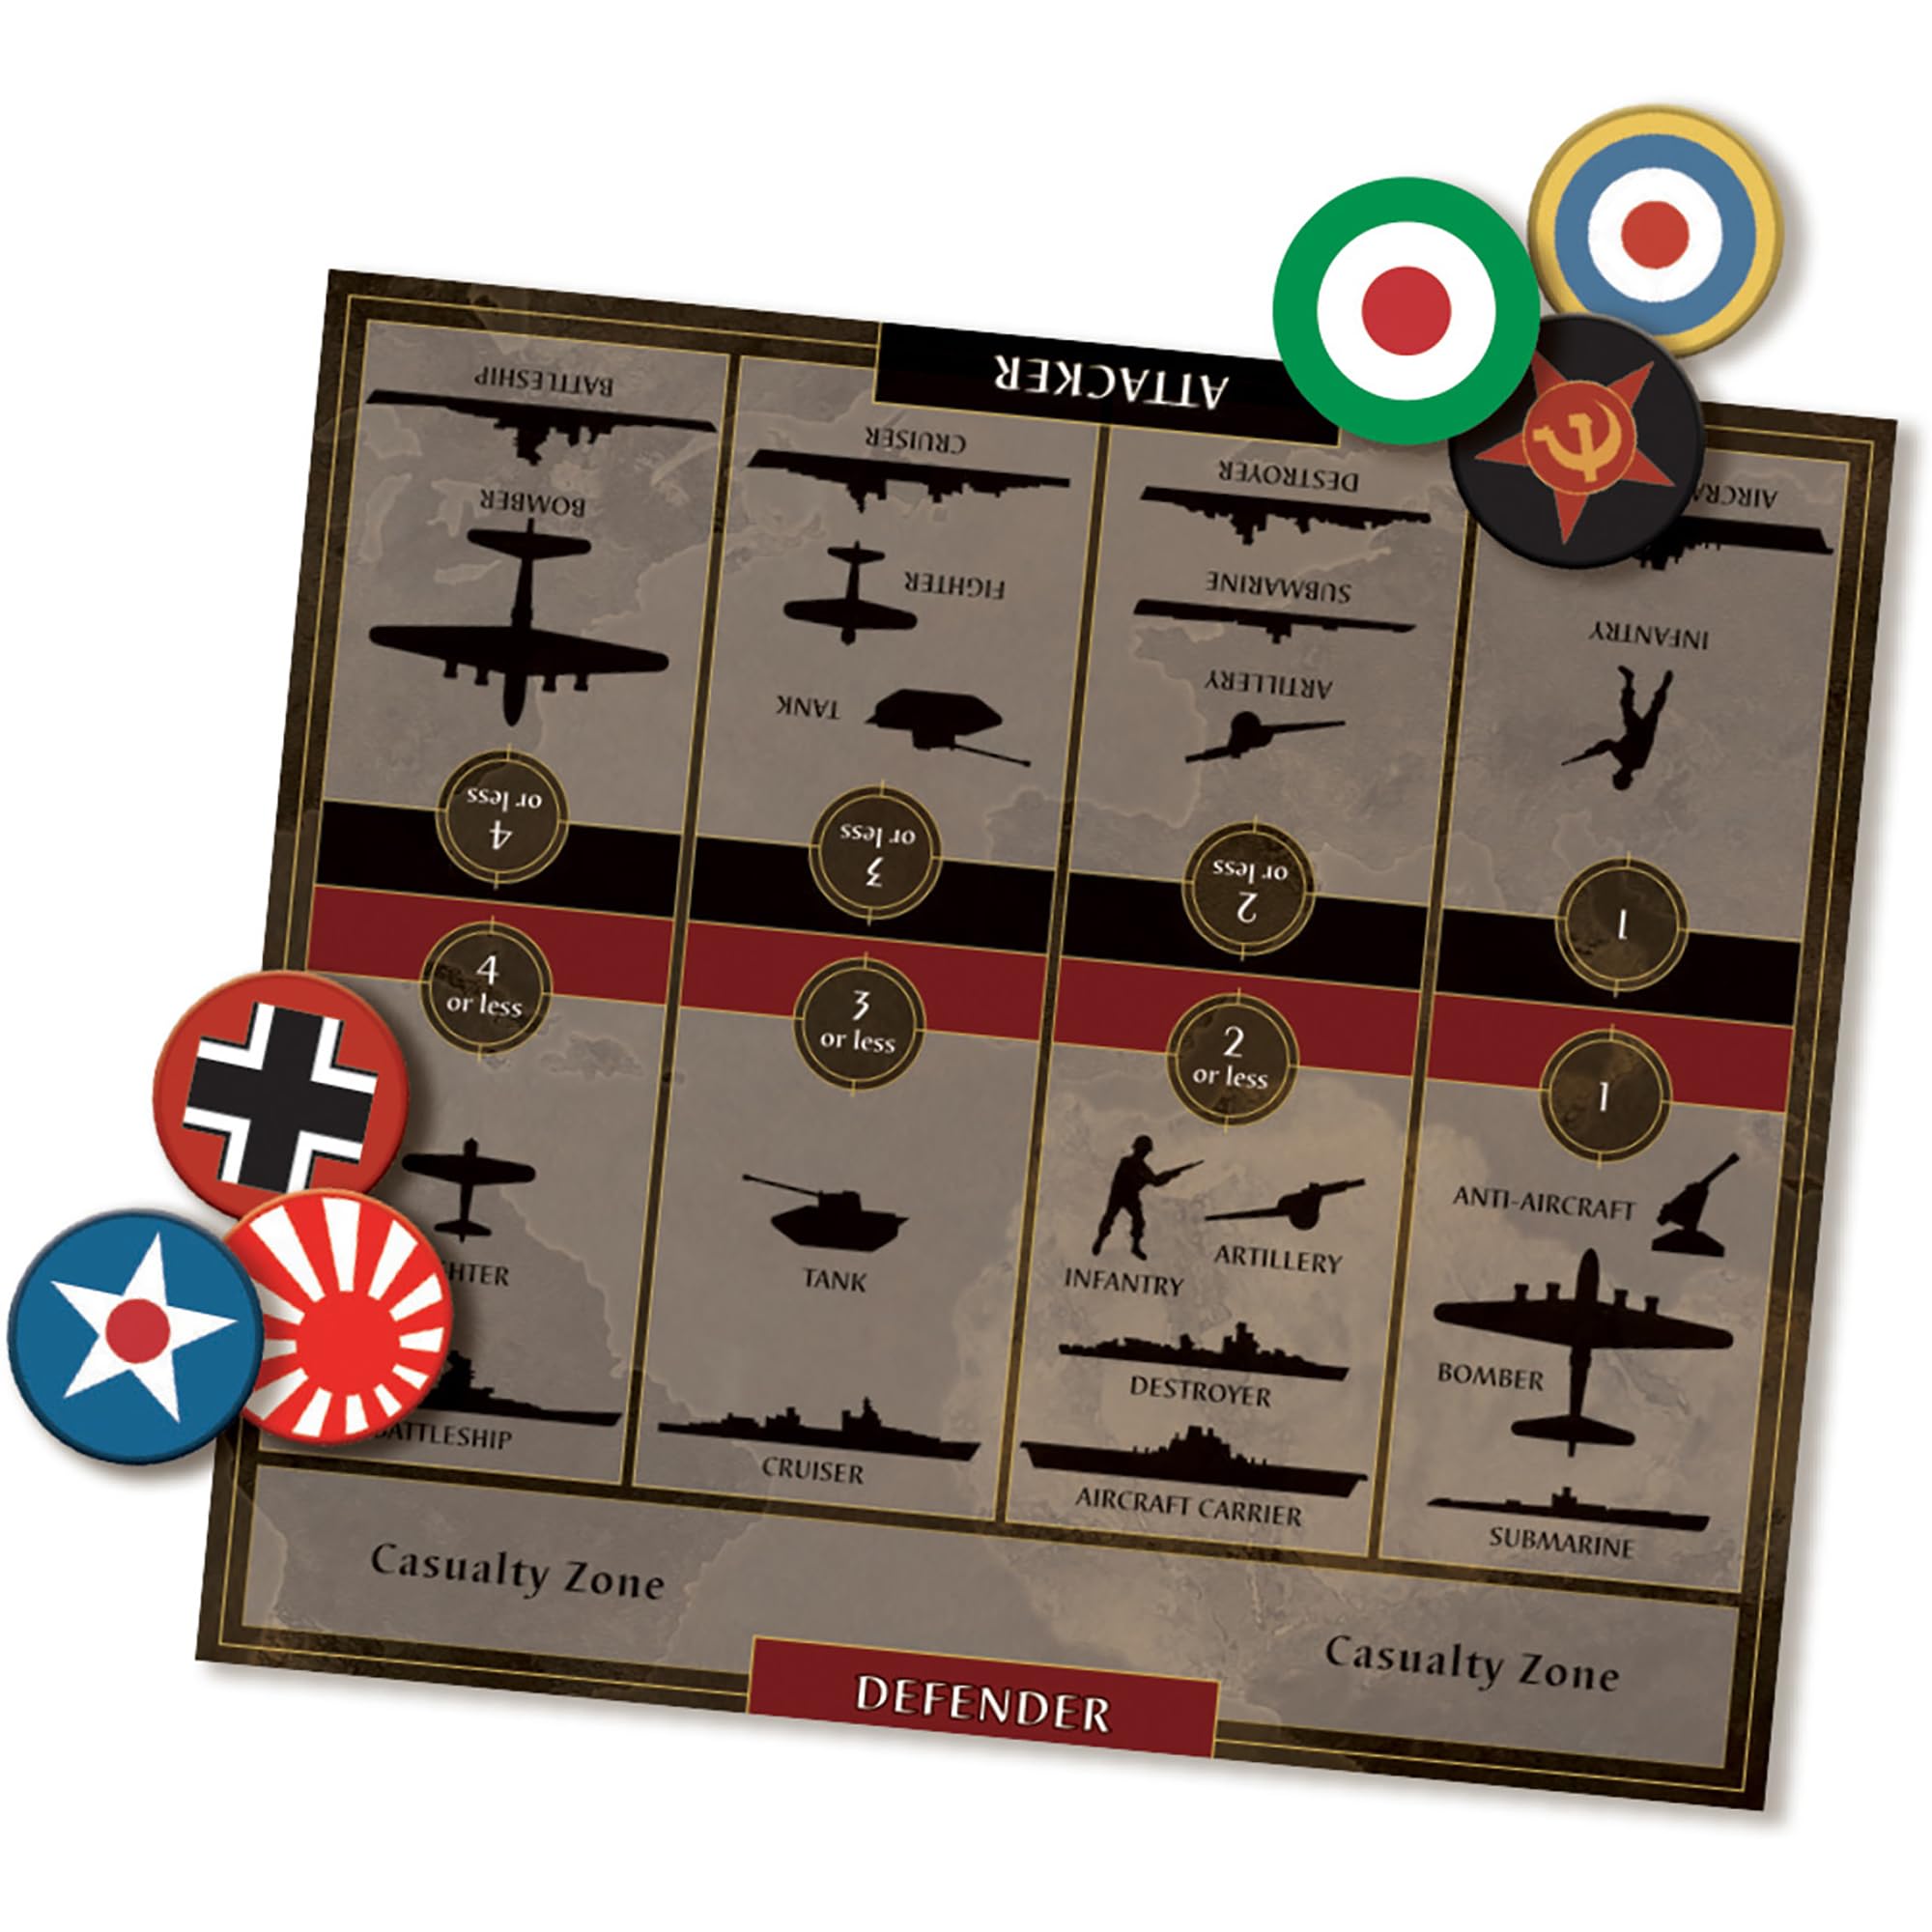 Axis & Allies: Anniversary Edition - 2-6 Players - Ages 12+ - 40th Anniversary Deluxe Edition Over 600 Plastic Miniatures, Huge 24